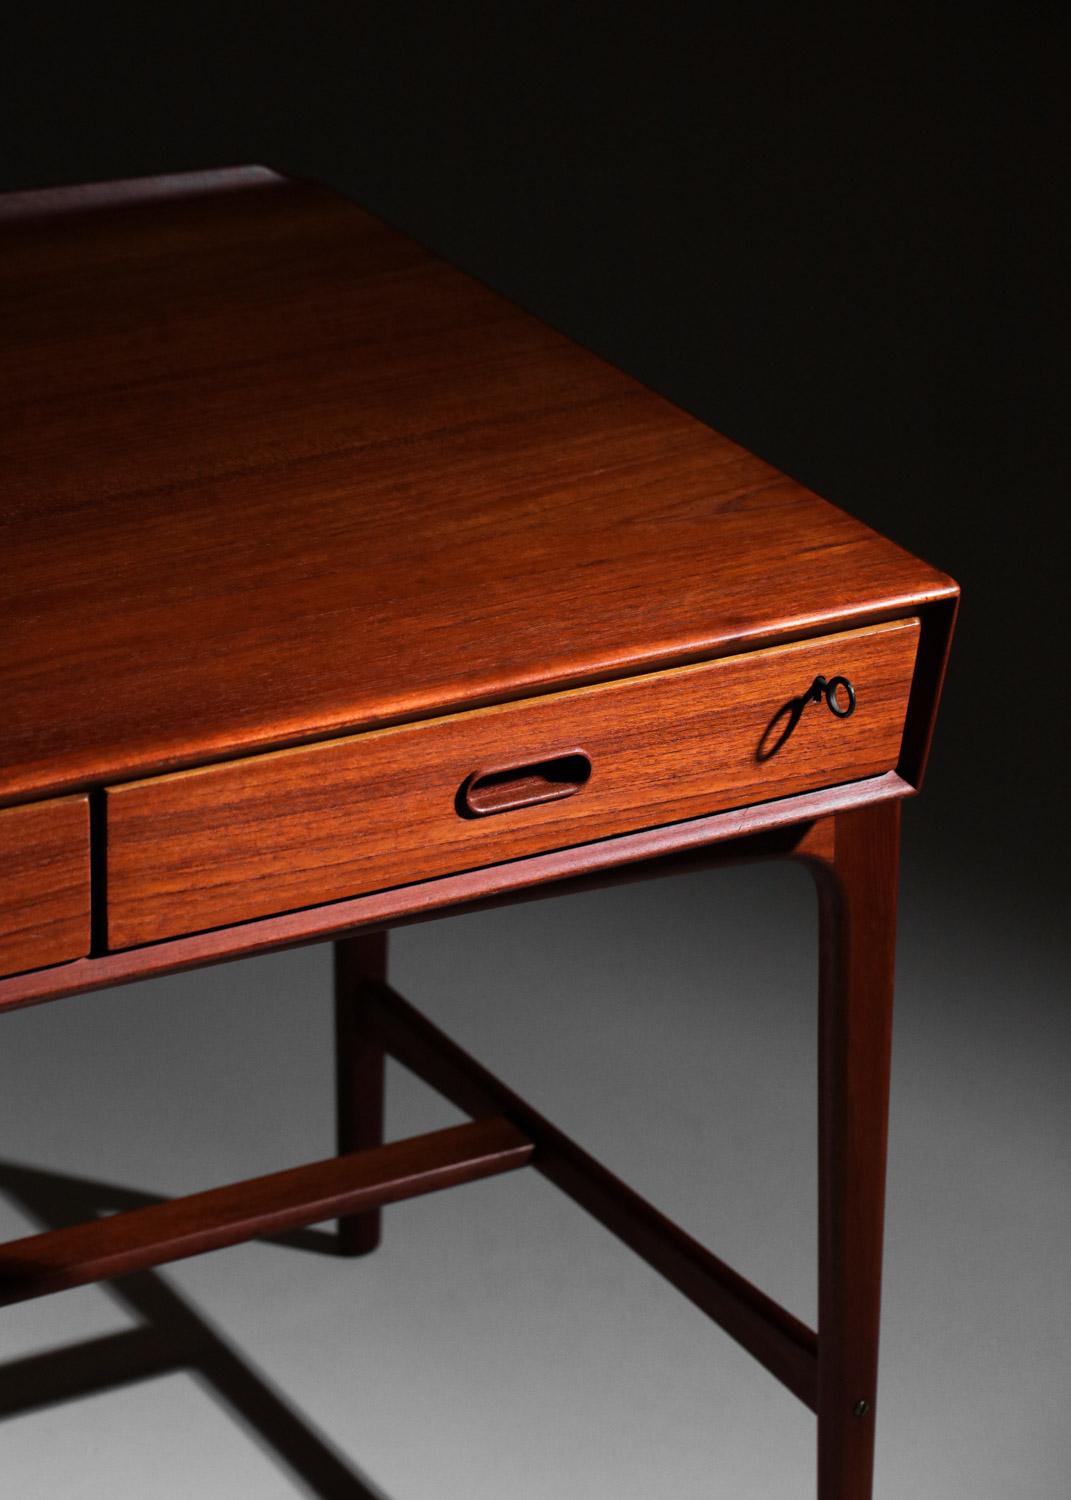 Mid-20th Century Scandinavian Solid Teak Desk by Svend and Madsen Danish, 1960s For Sale